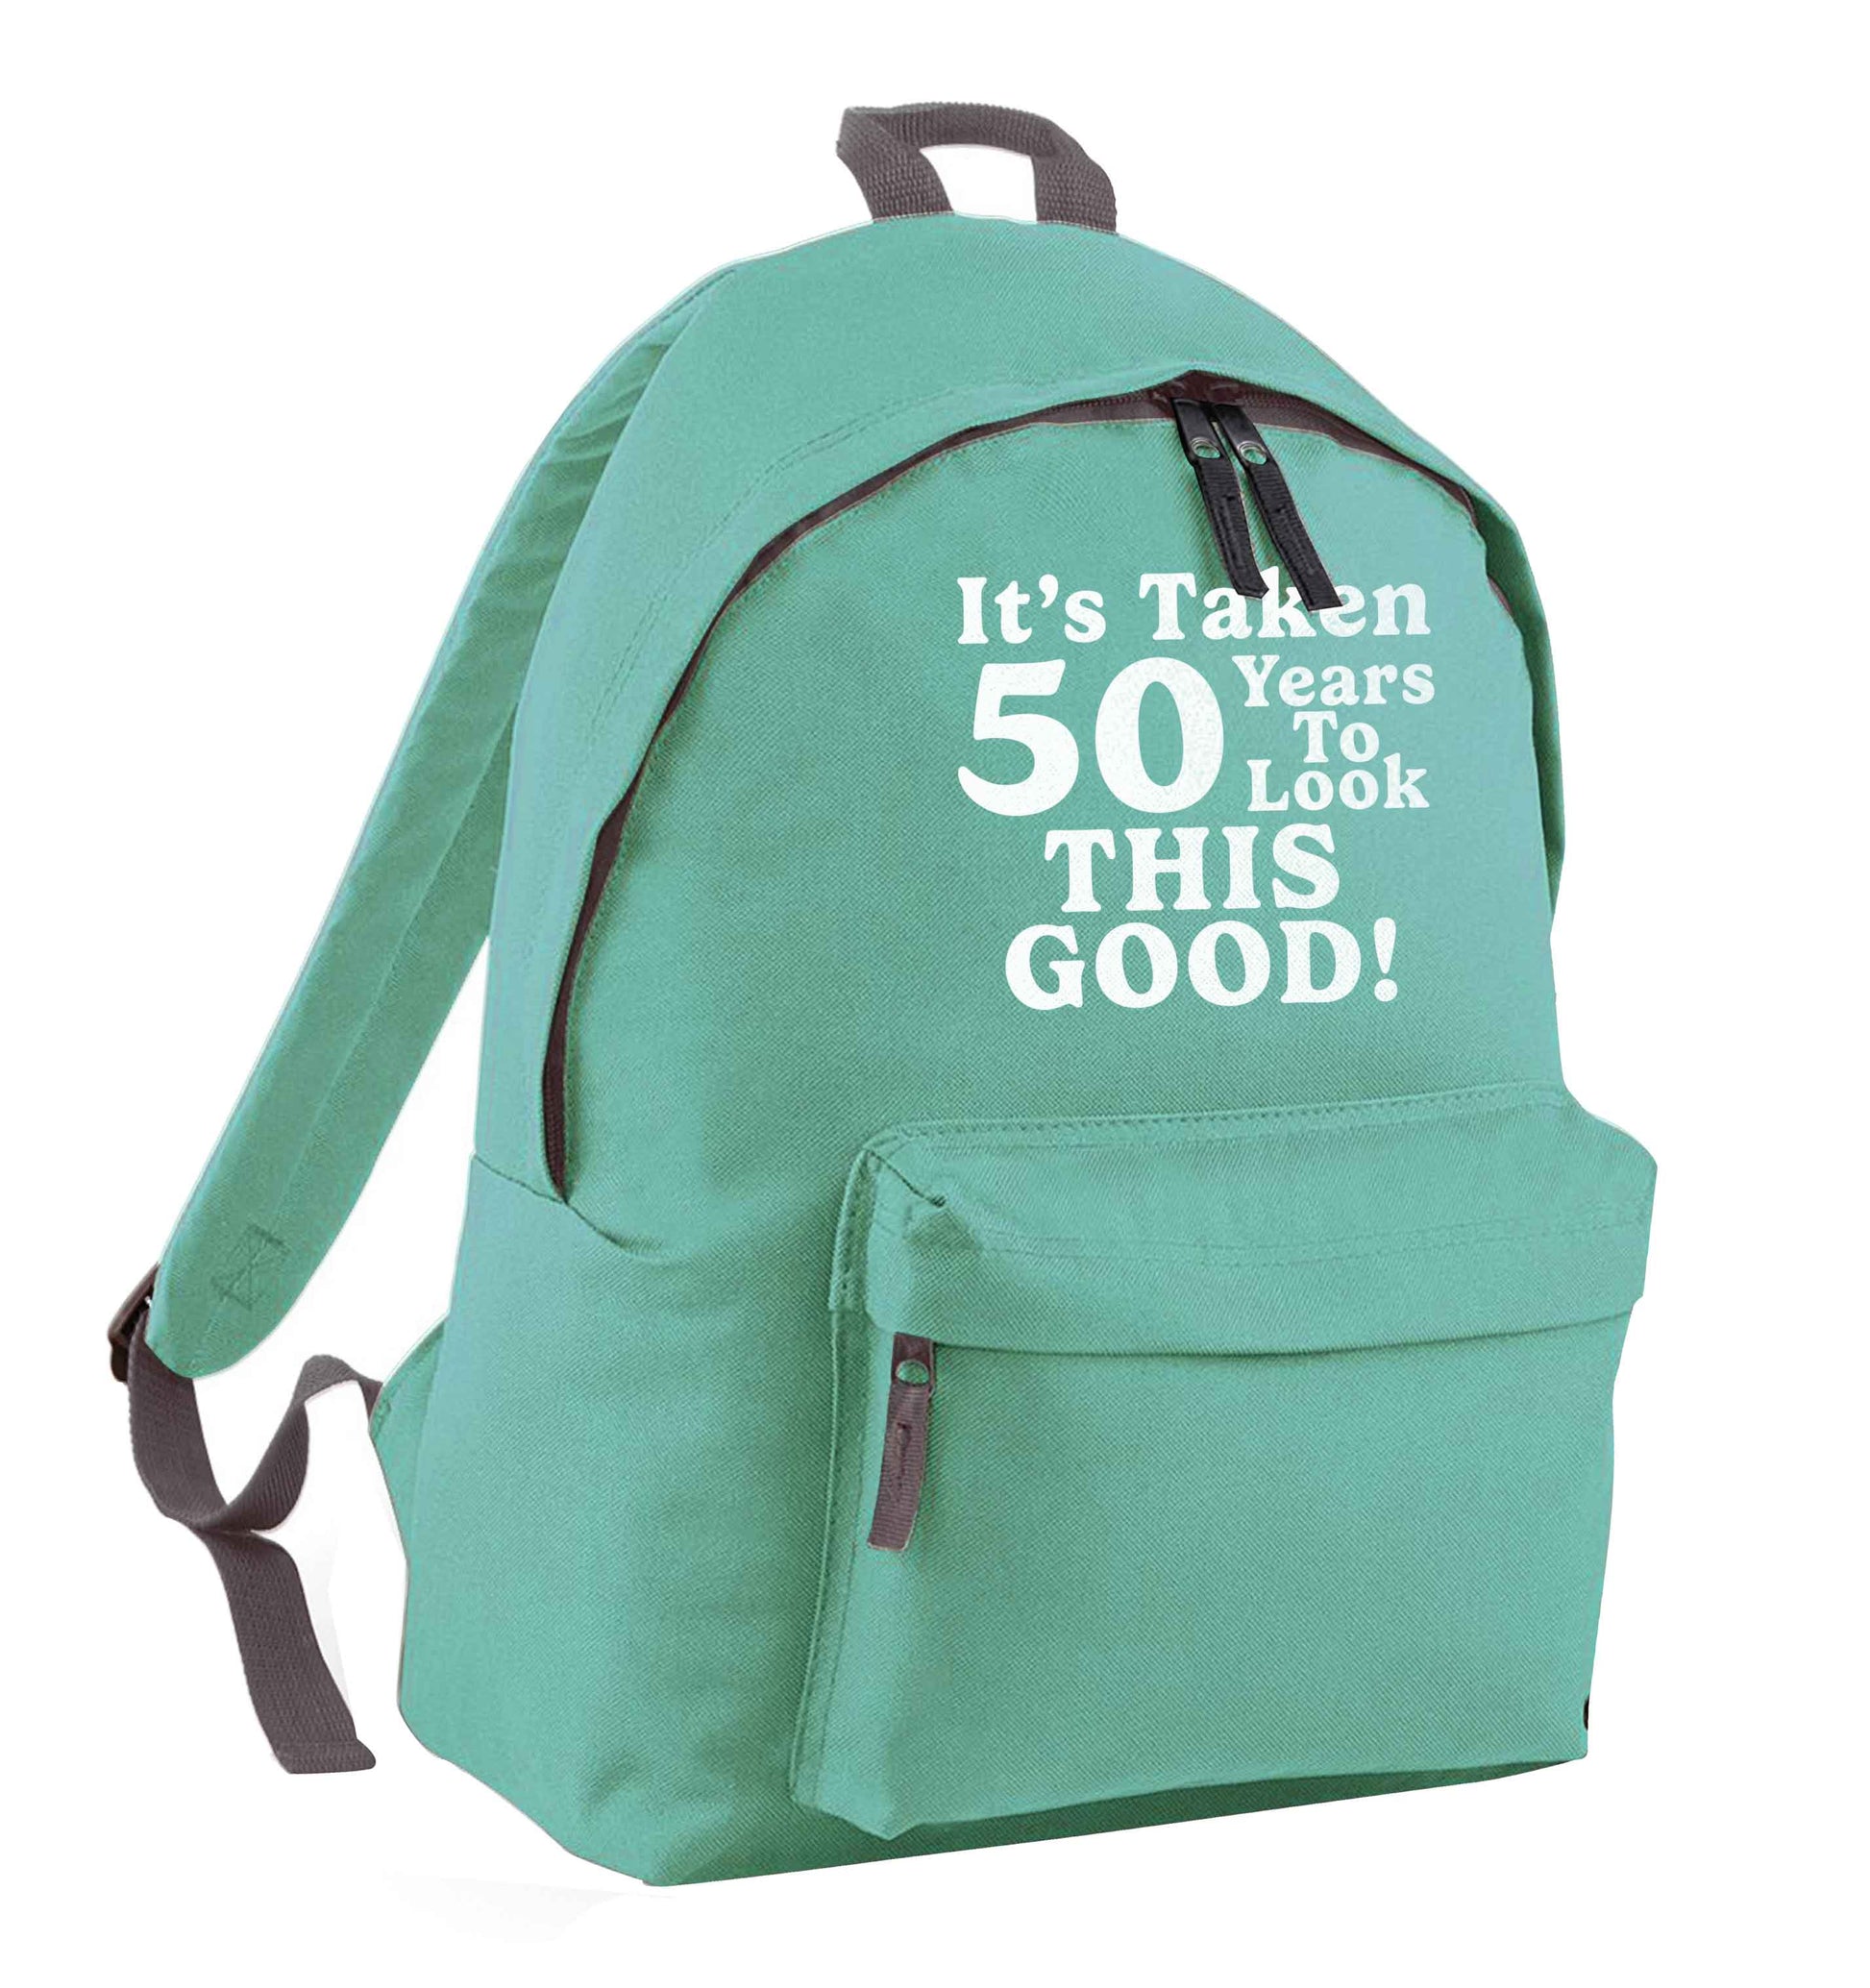 It's taken 50 years to look this good! mint adults backpack